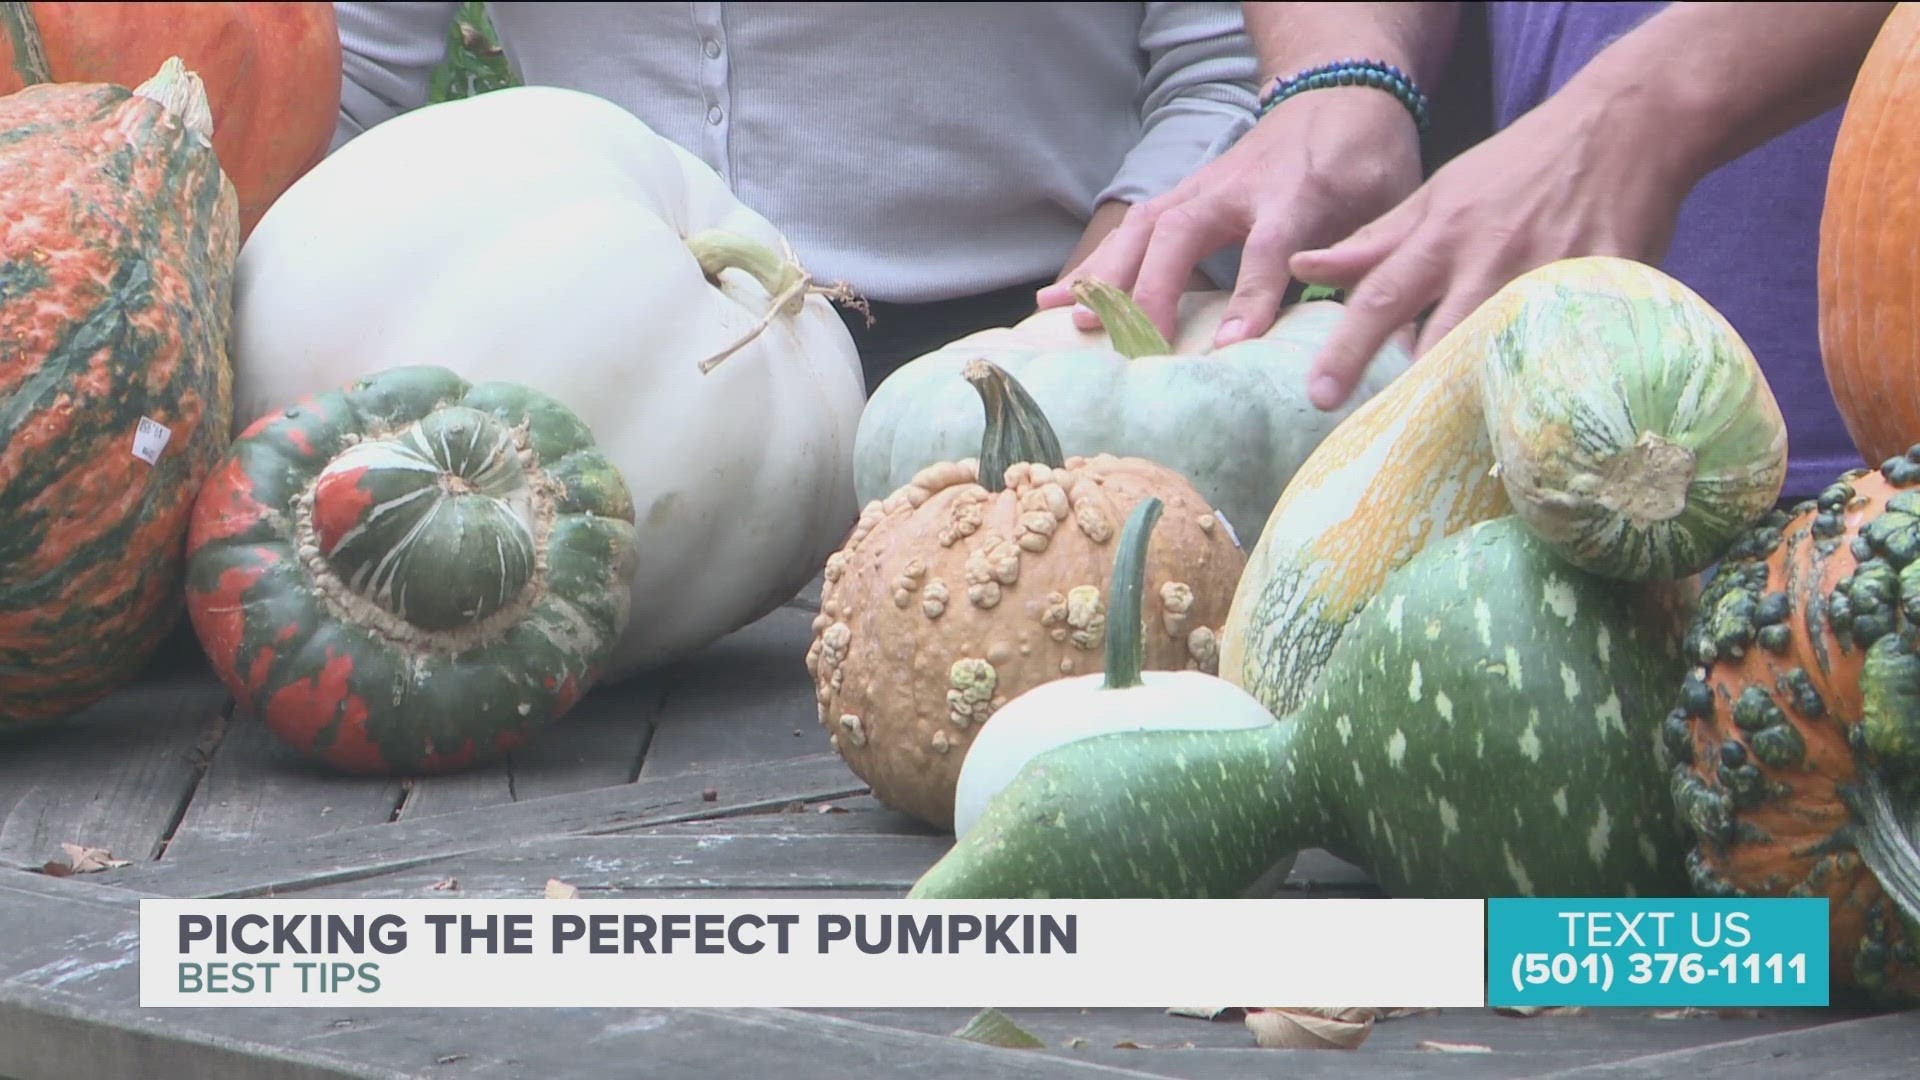 Gardening guru, Chris H. Olsen share his top tips on picking out the perfect pumpkin